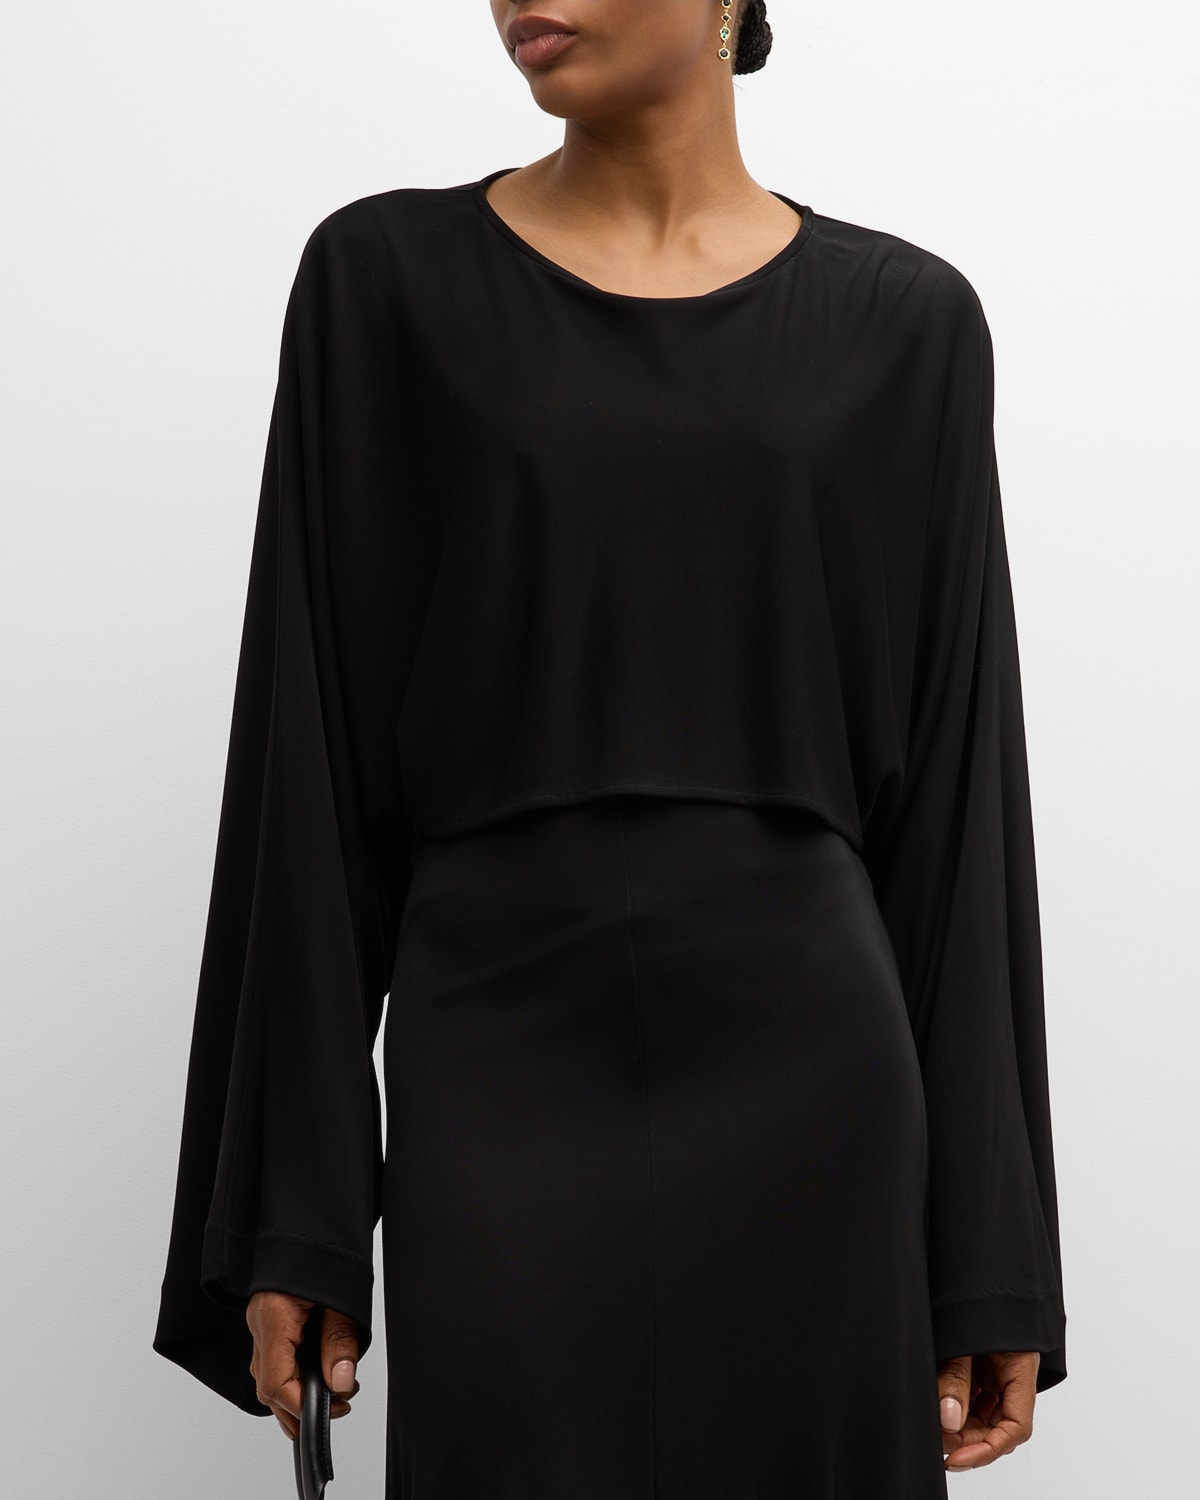 Movere Long-Sleeve Crop Top